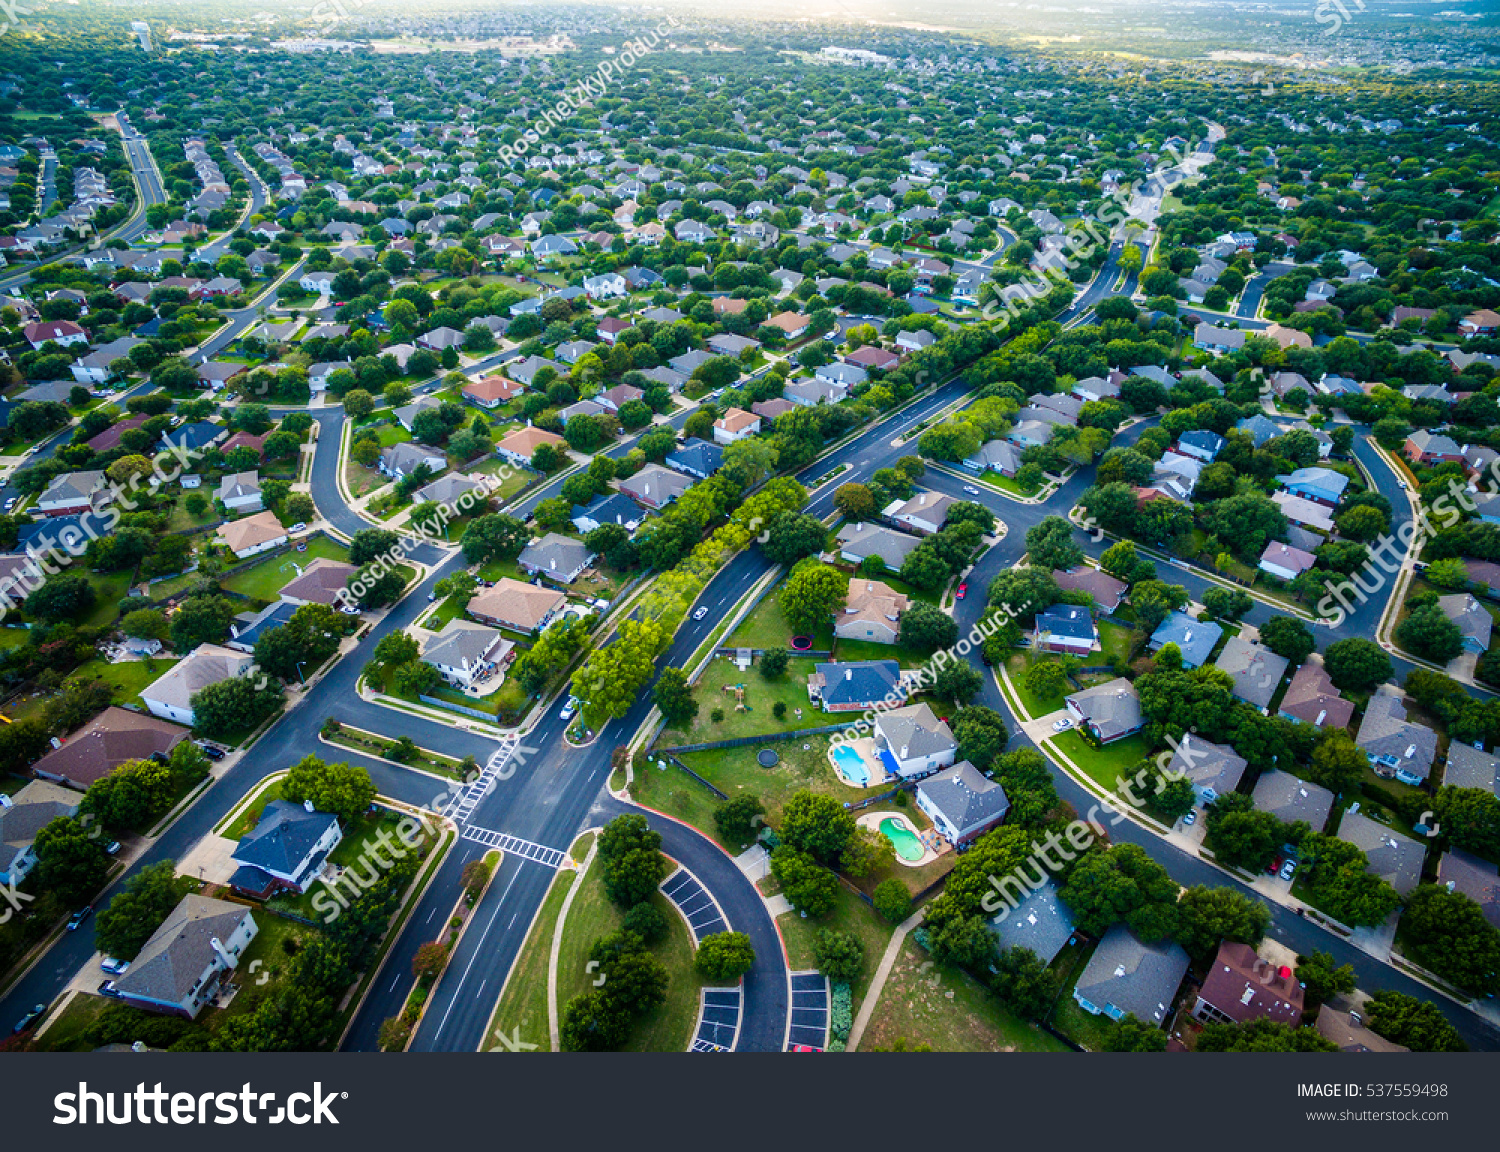 Thousands of houses aerial birds eye view suburb housing development new neighborhood in Austin , Texas , USA modern architecture and design #537559498